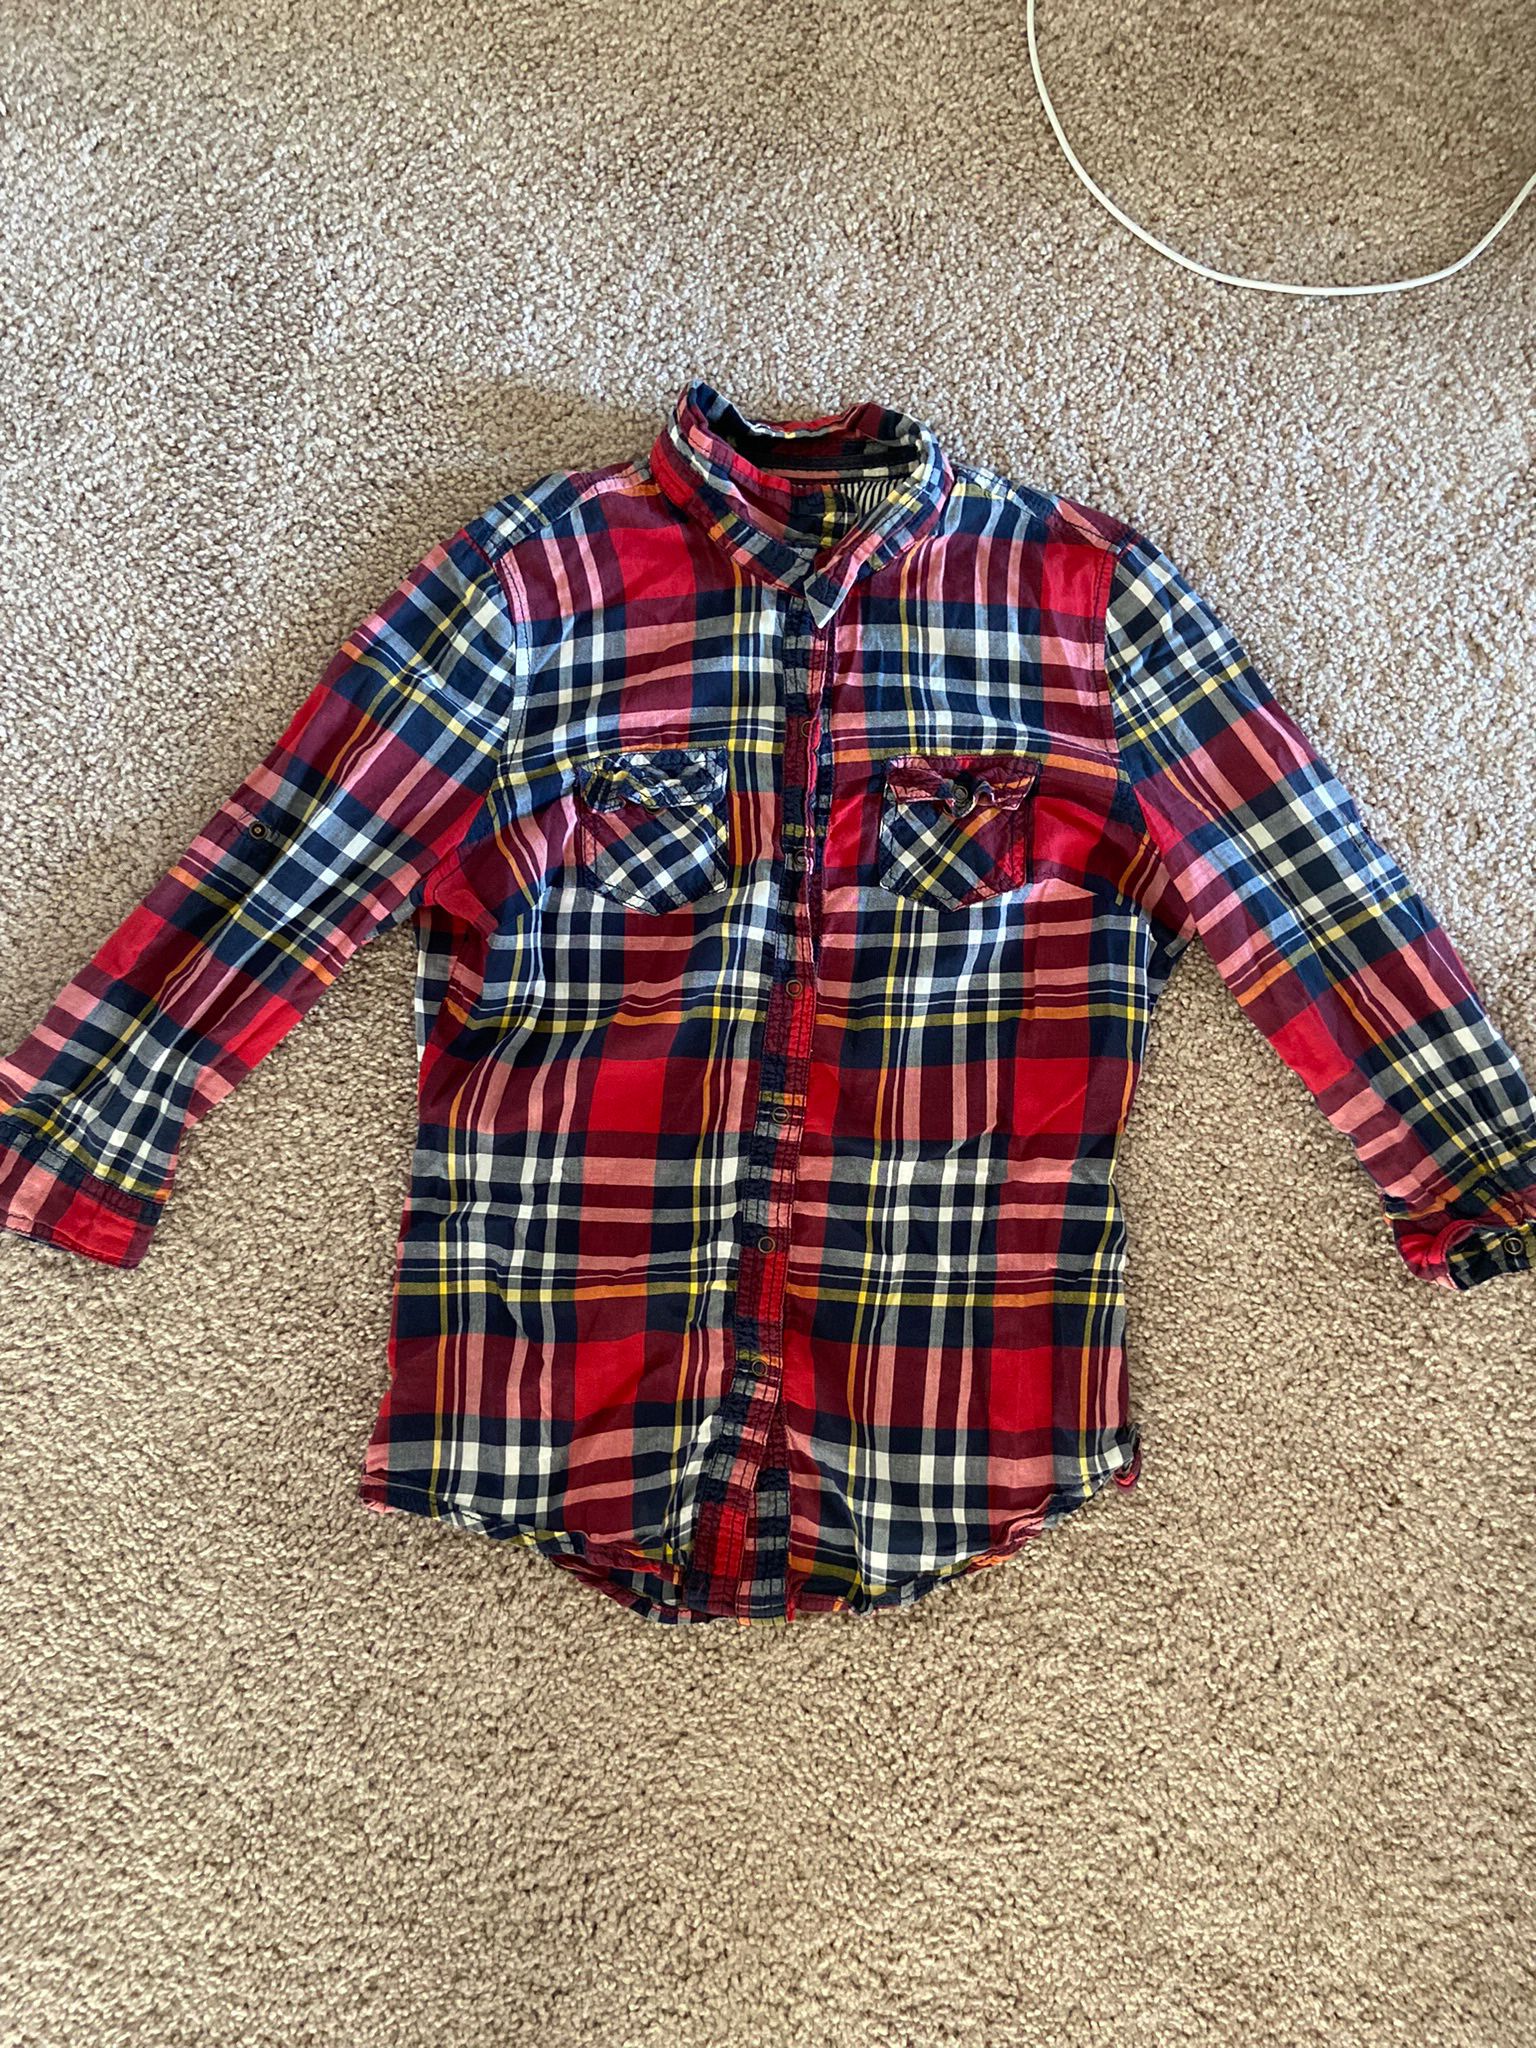 Red Plaid Women's Flannel